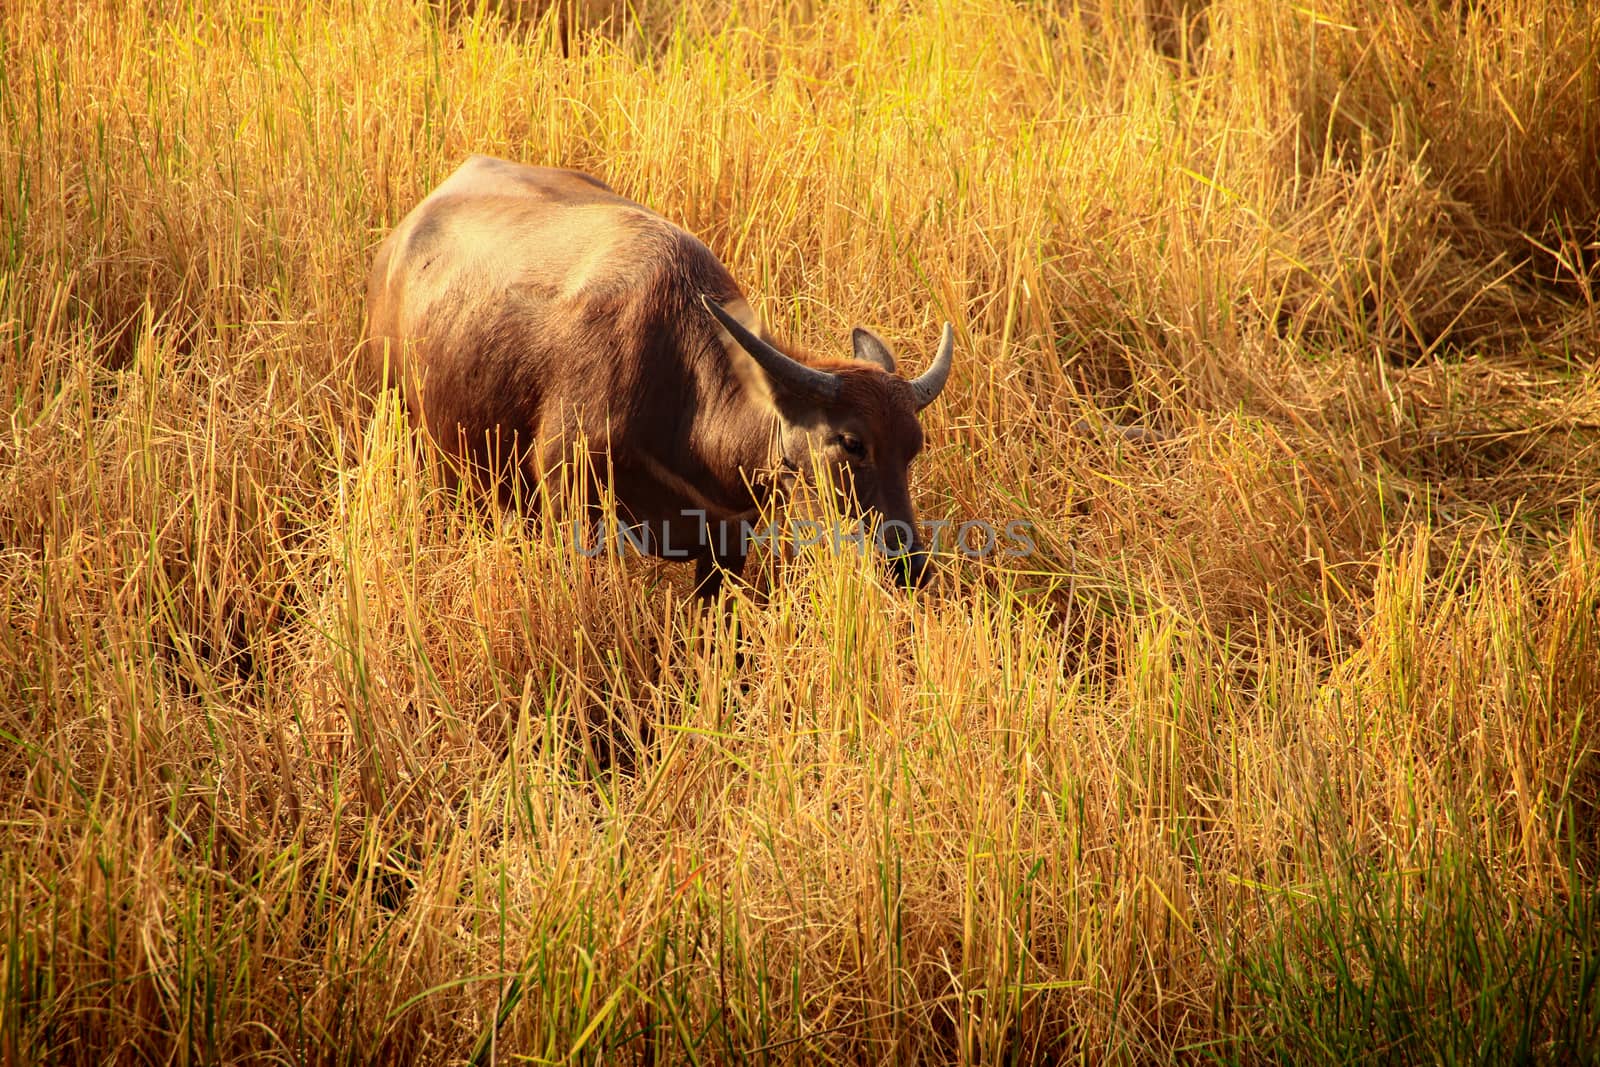 A water buffalo grazing on dried rice fields showing the rural life in Kampot, Cambodia